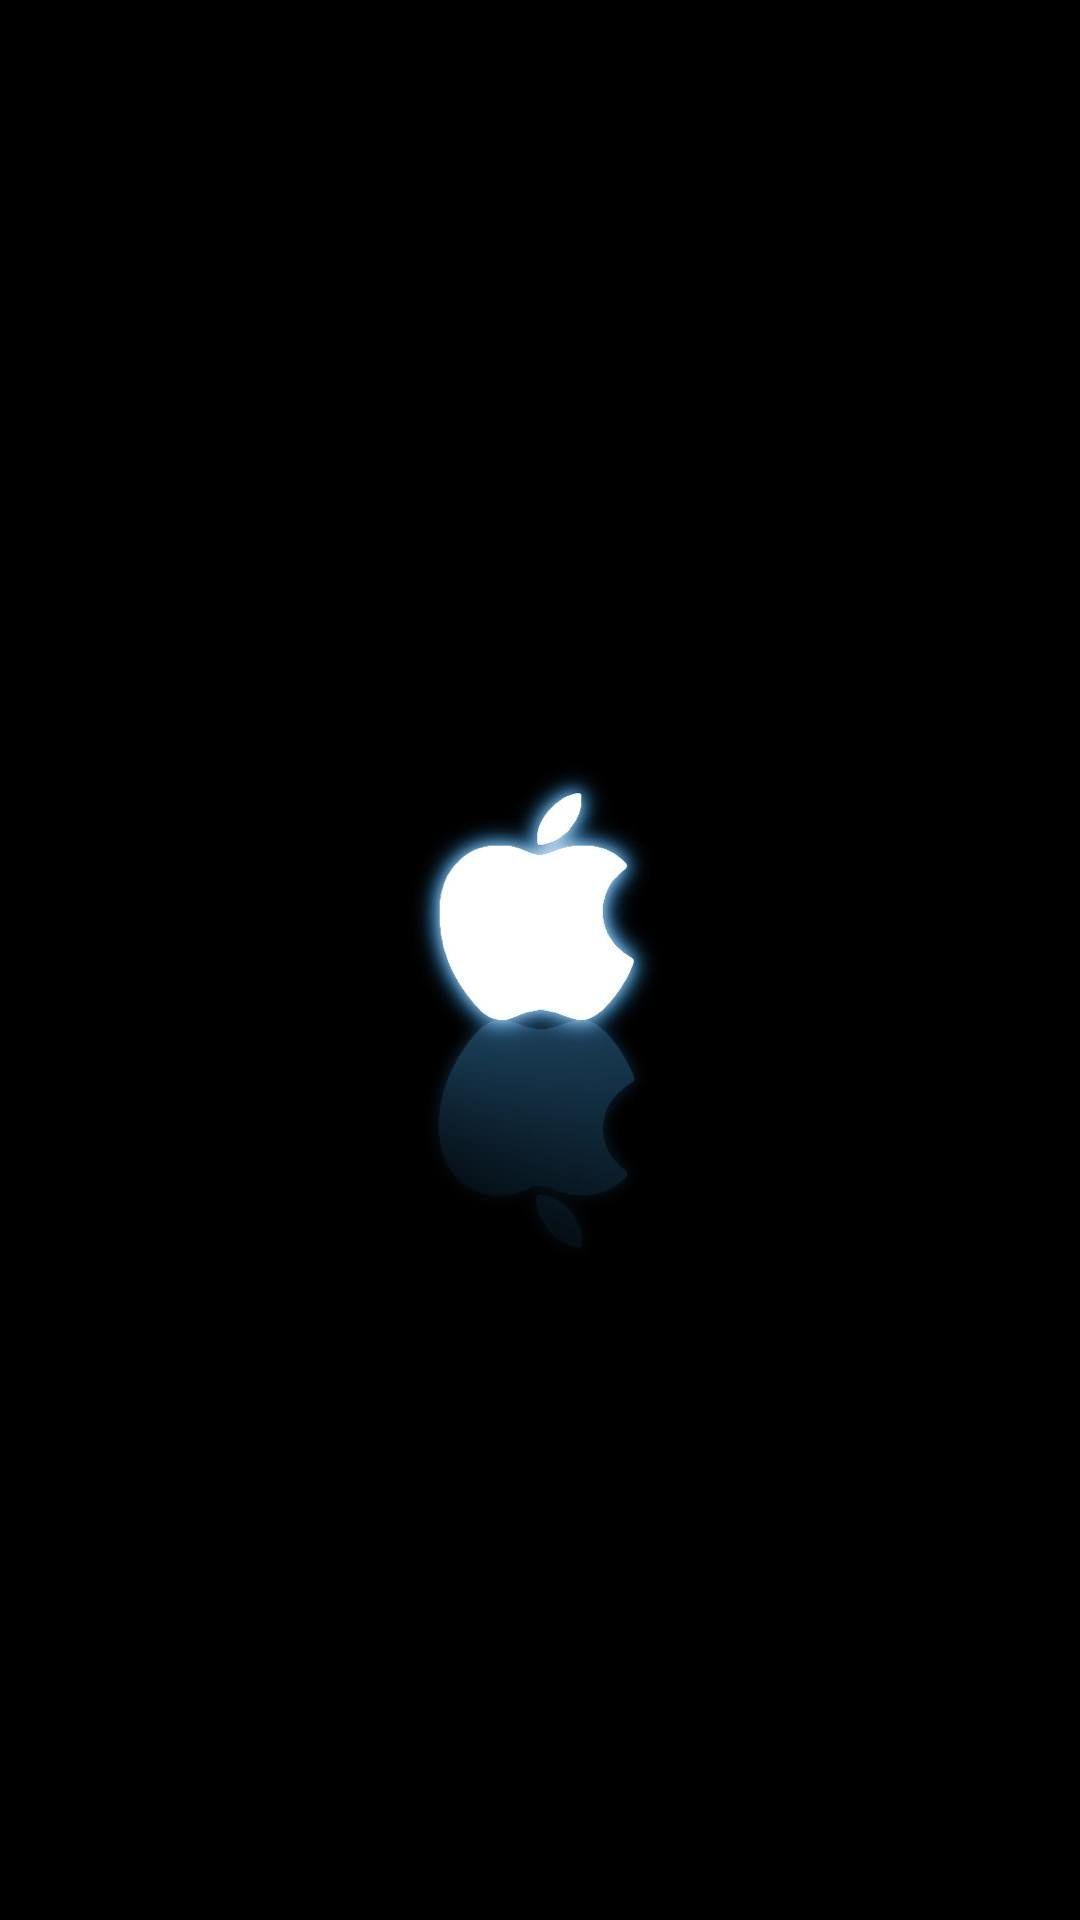 Black and White Apple Logo - Black and white Apple logo - iPhone6 wallpapers | Apple'tite ...